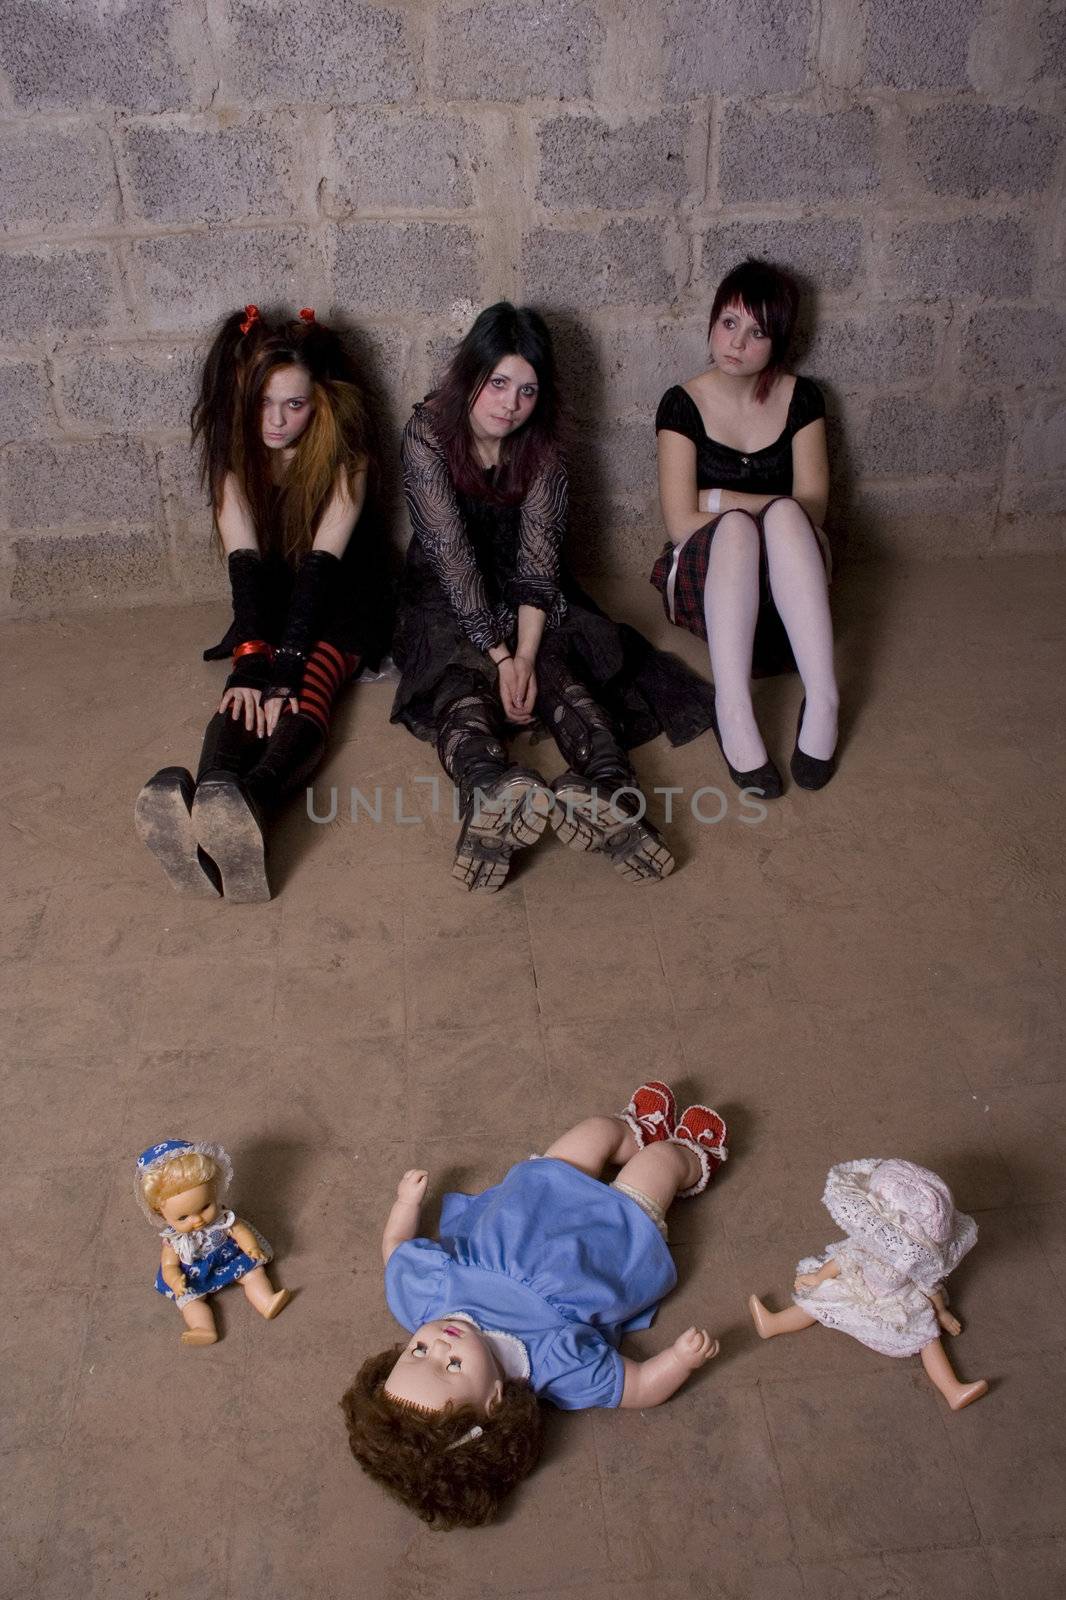 Girls with dolls sit on a floor in depression